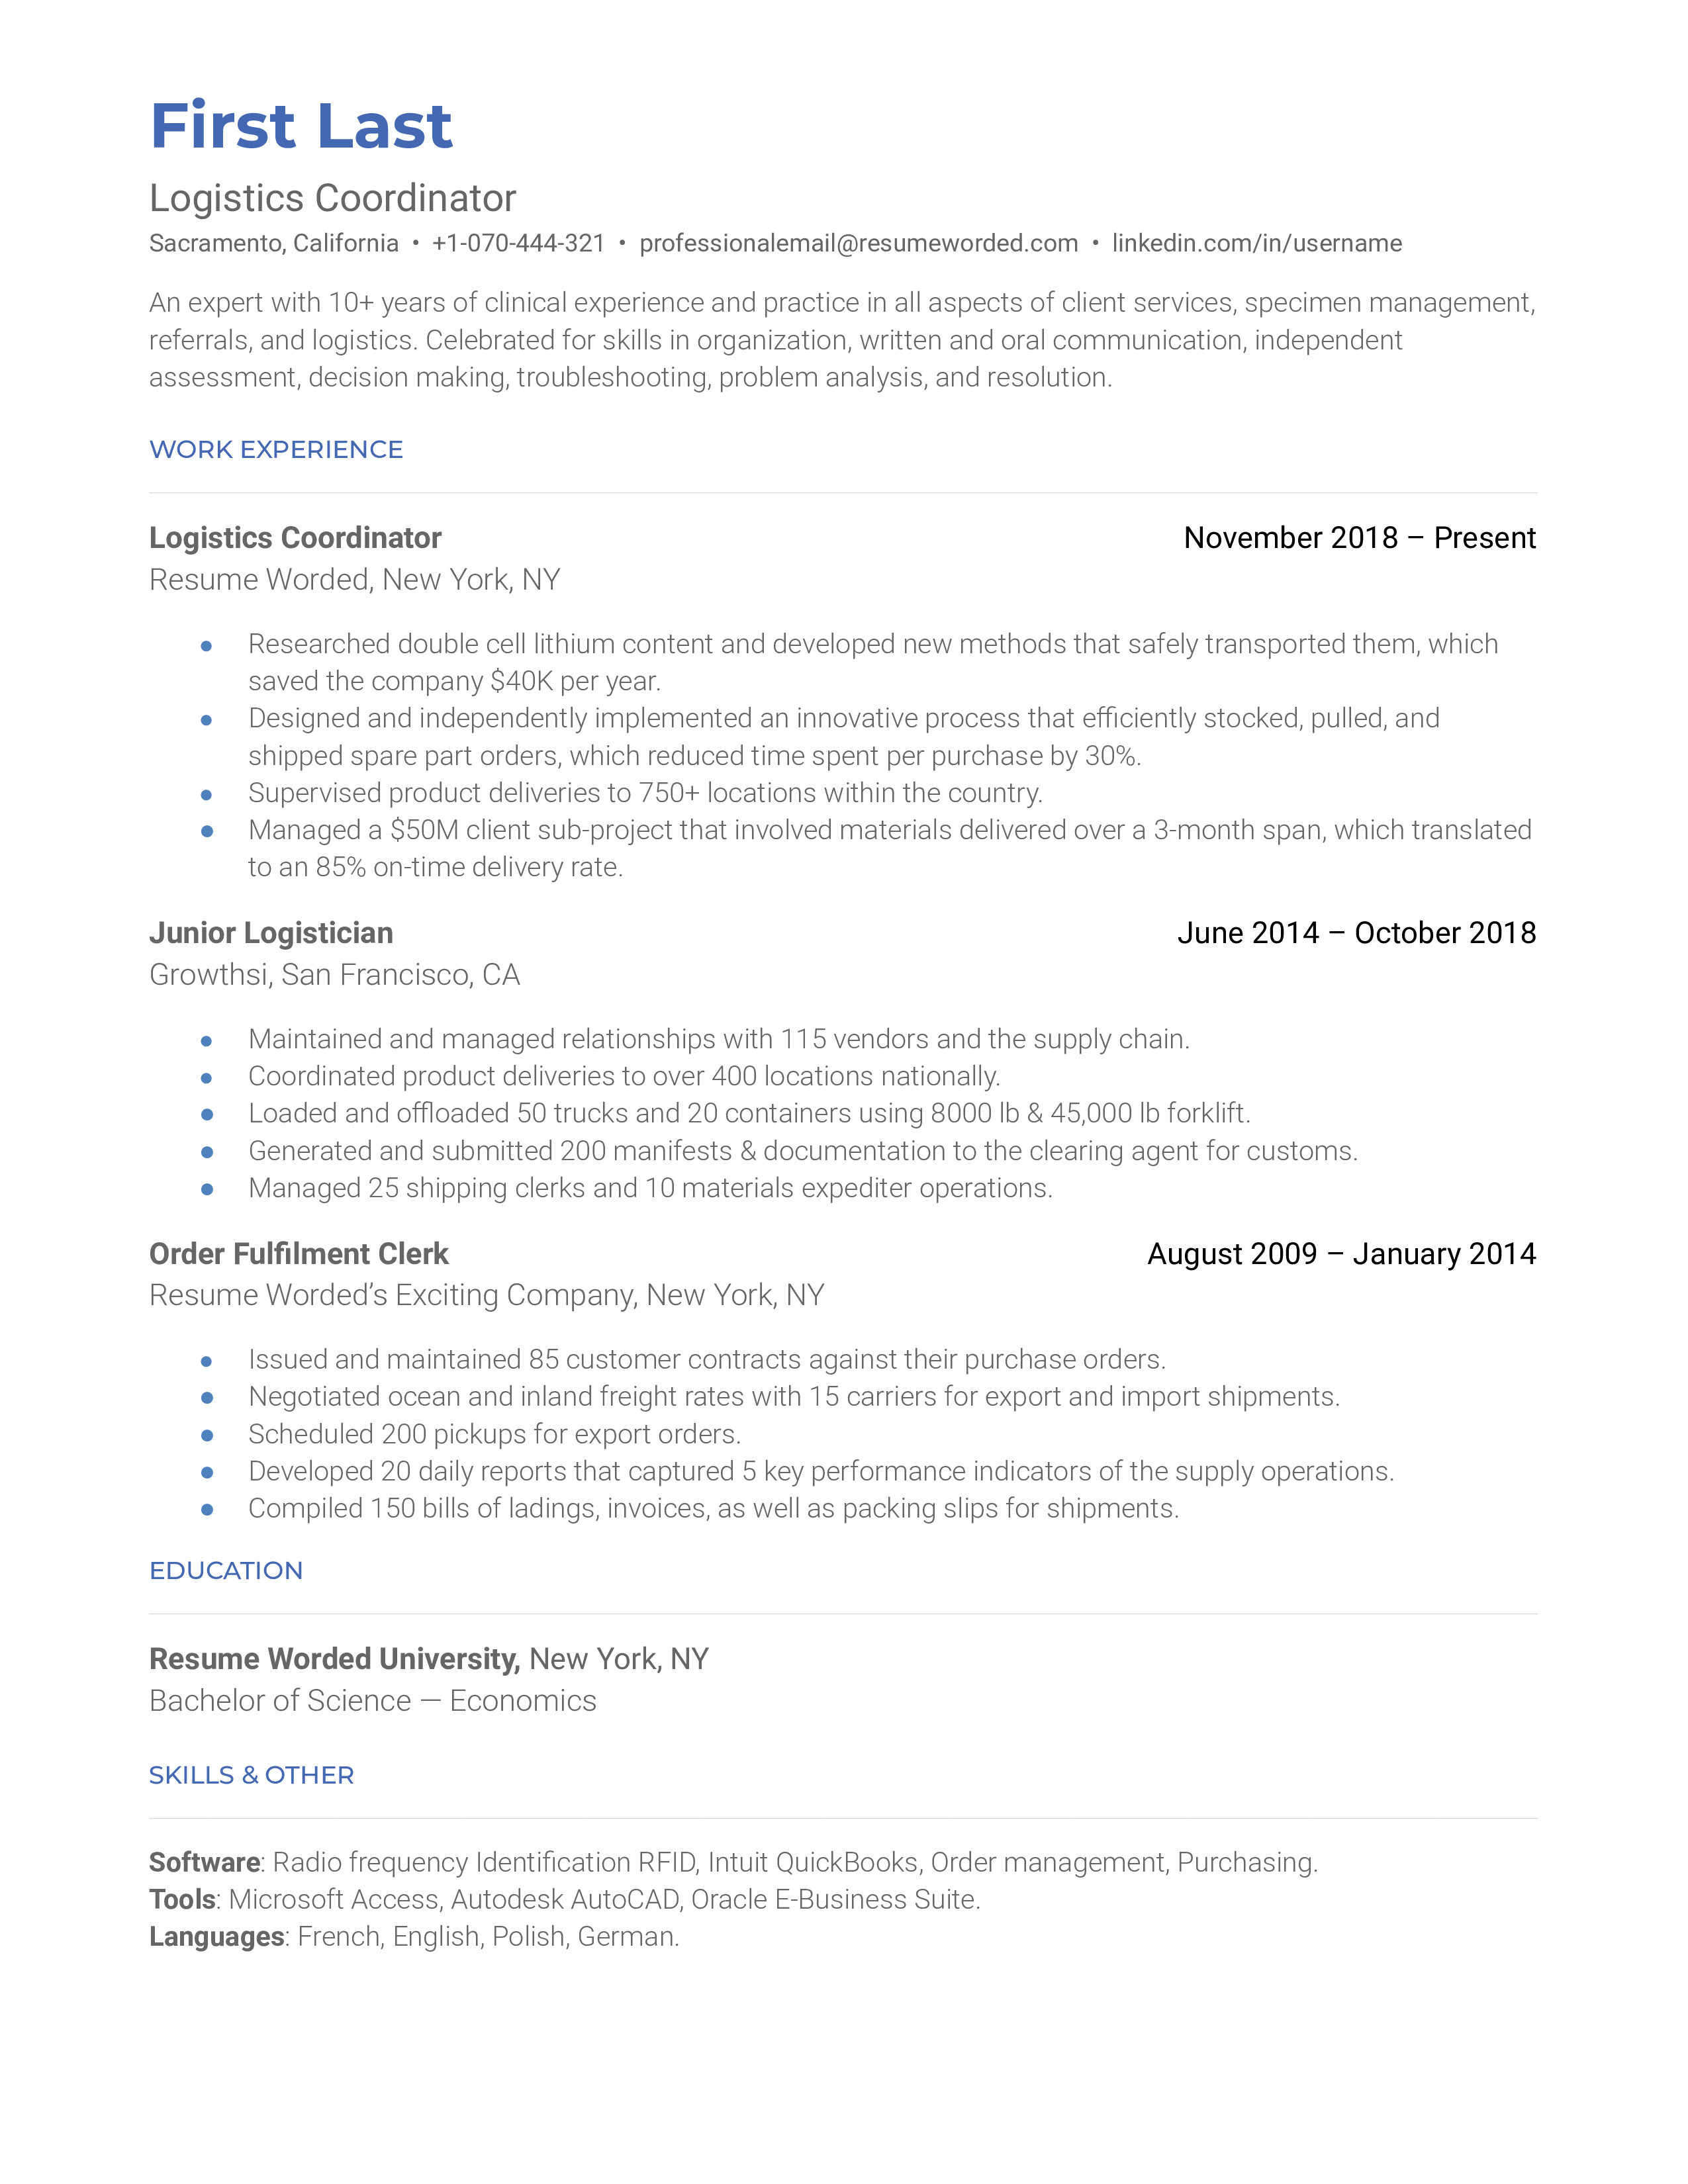 A CV of a Logistics Coordinator showcasing skills and experience in the logistics and supply chain industry.